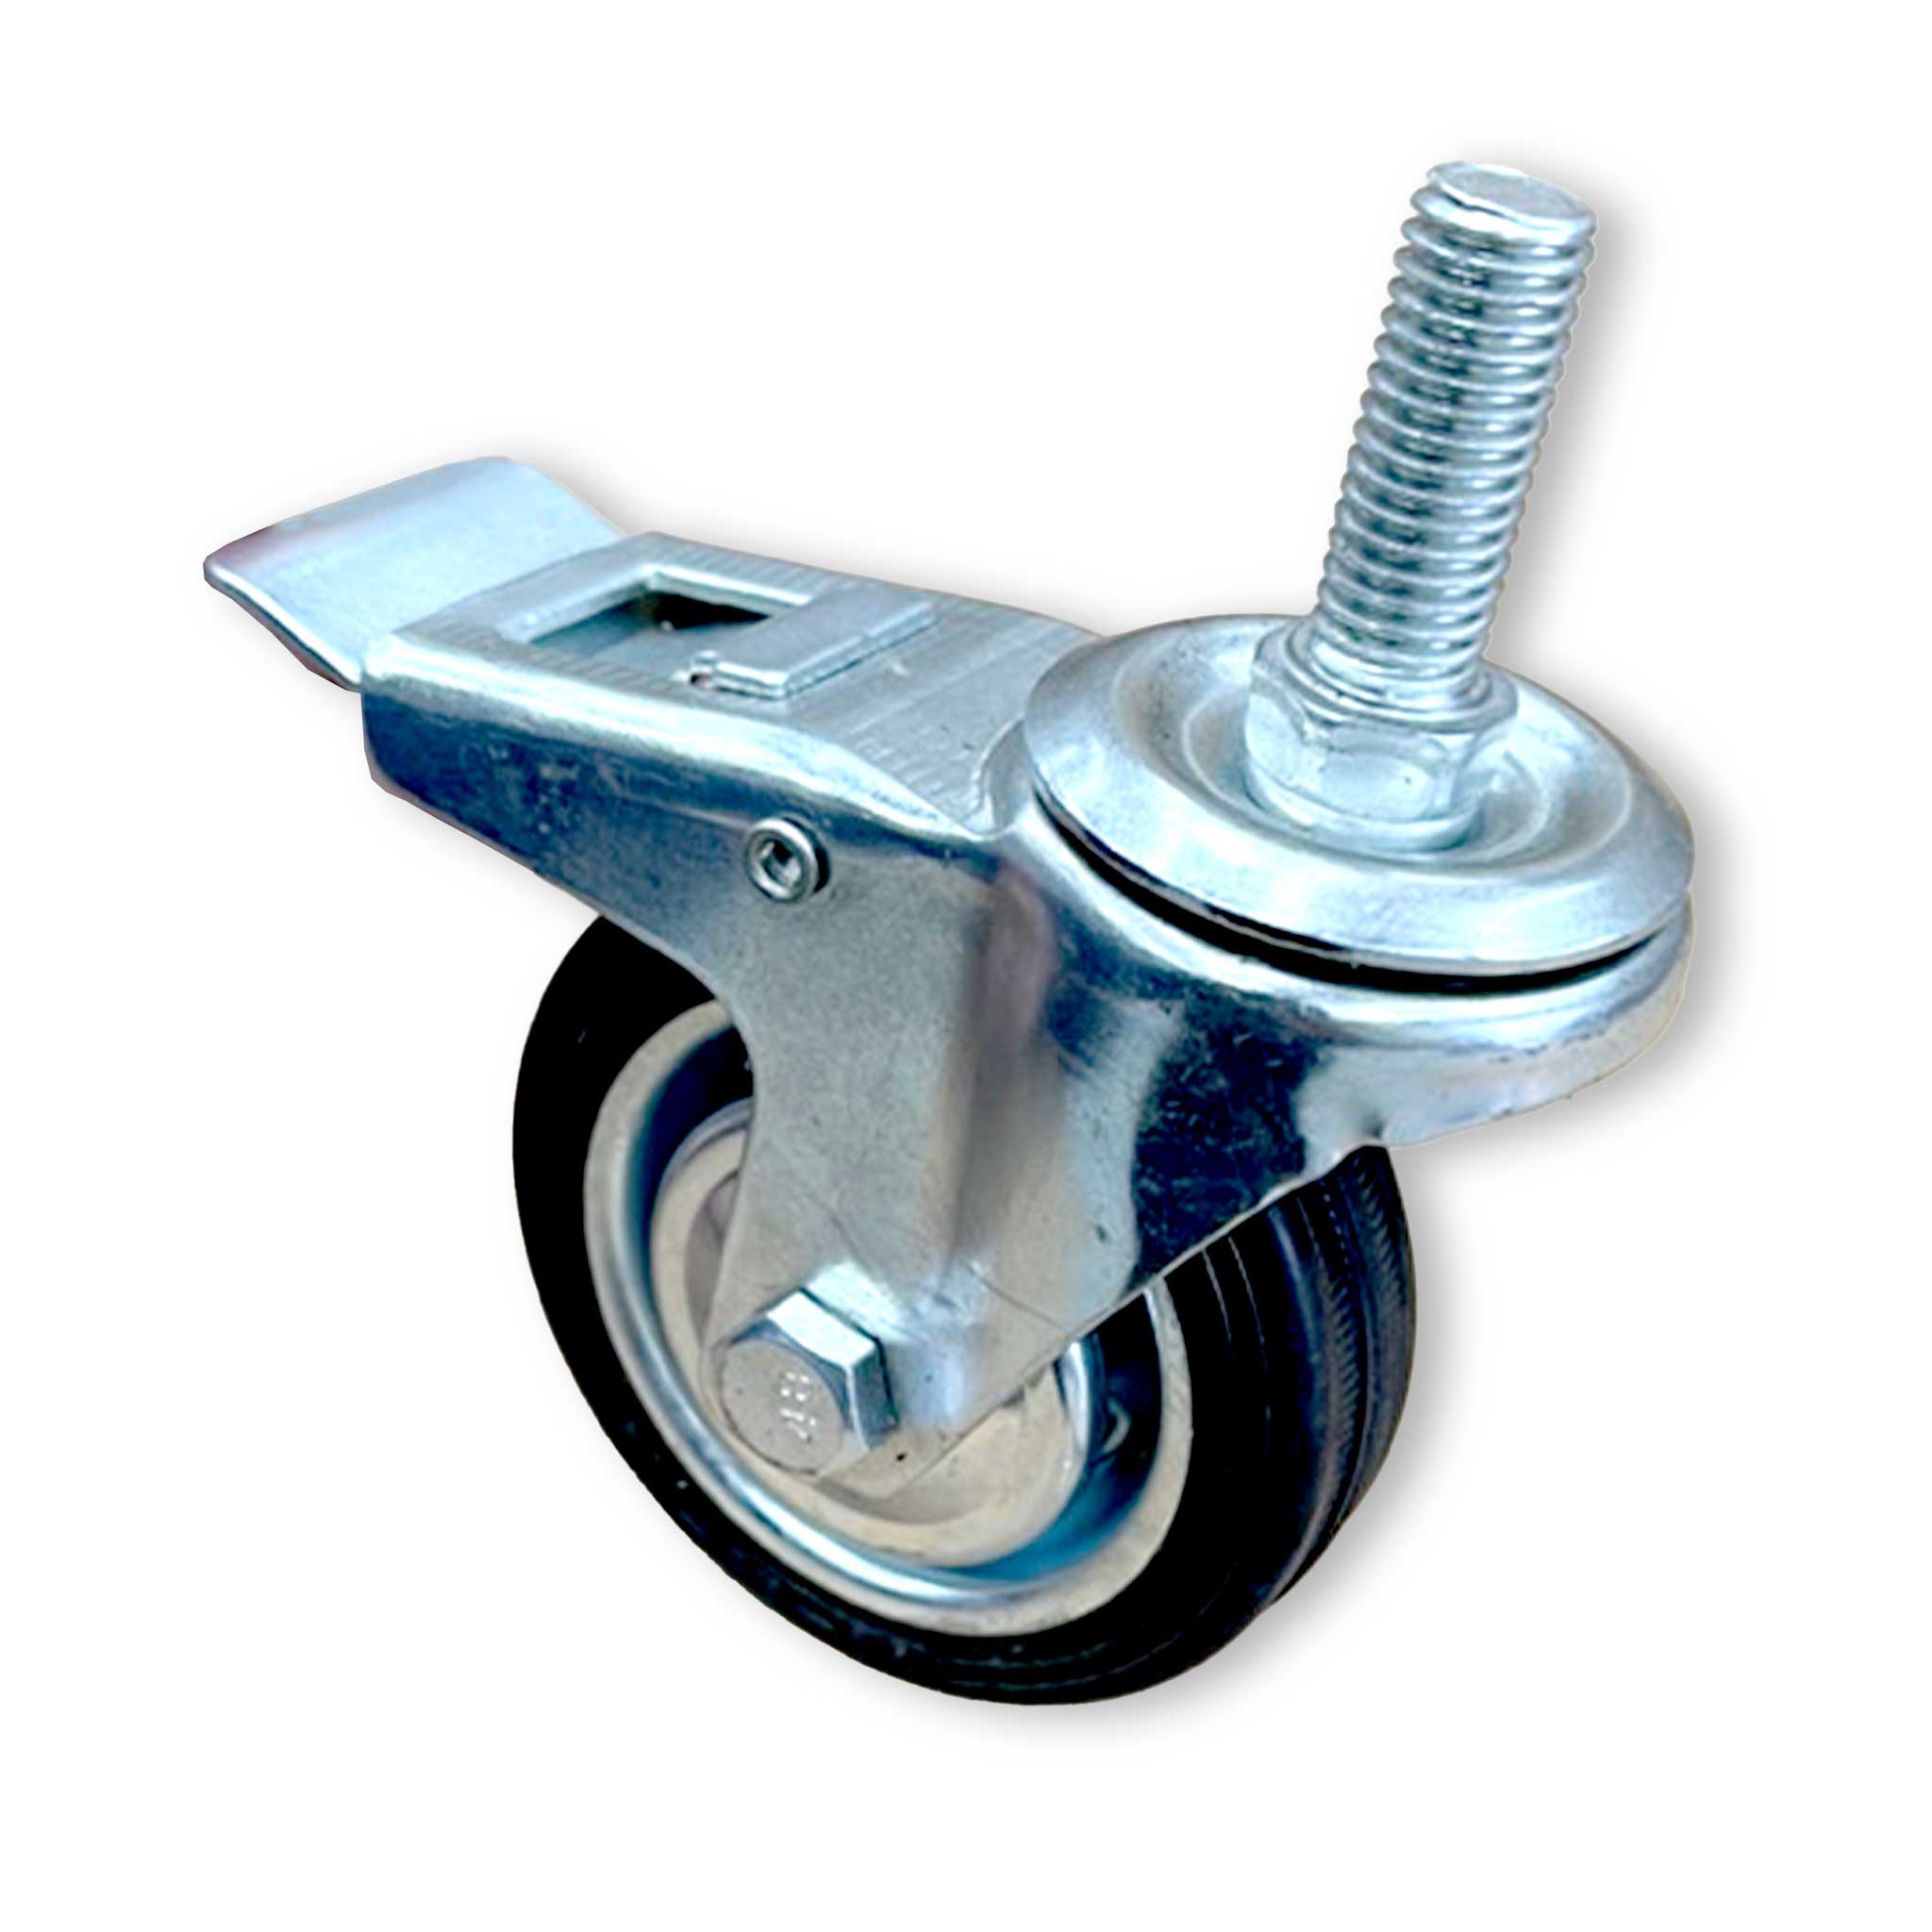 Rubber Castor Trolly Wheel with Galvanised Frame and Break System -  collection by Buzzbee Beekeeping Supplies